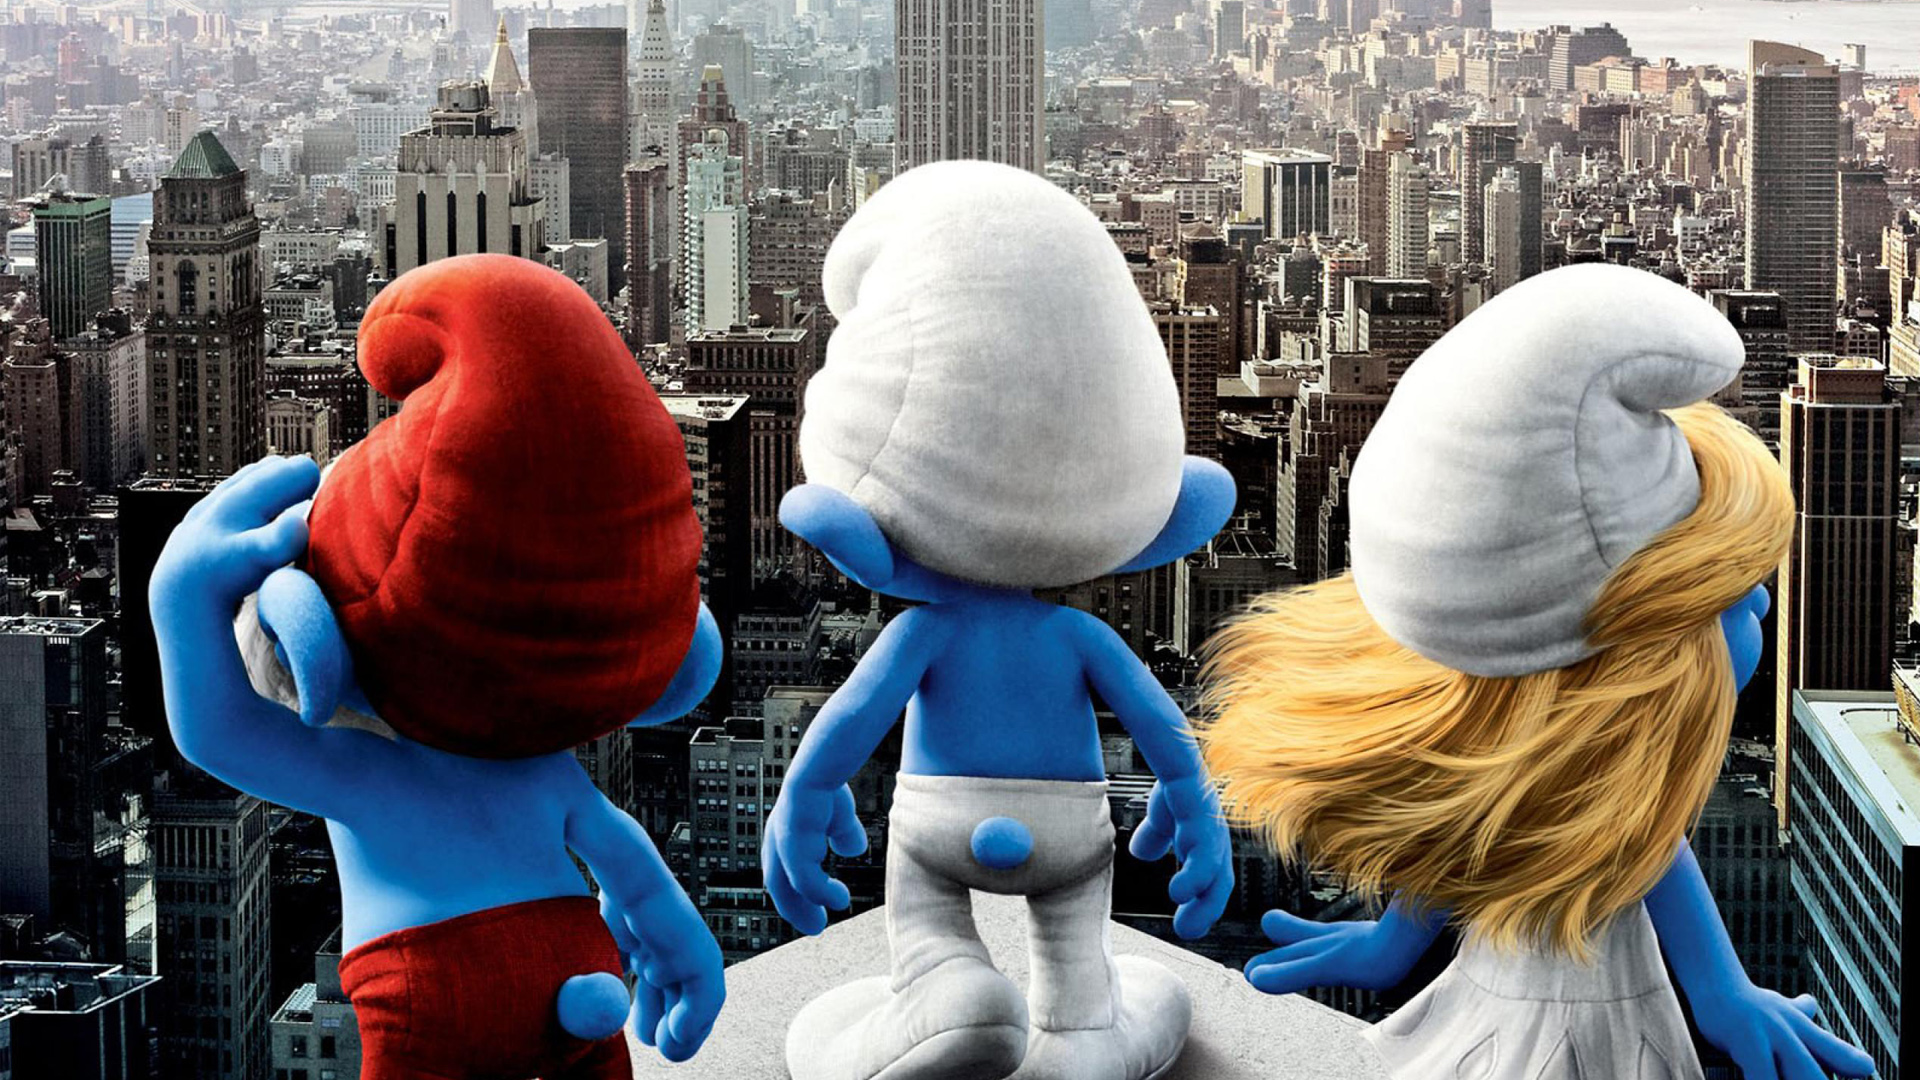 Movie The Smurfs HD Wallpaper | Background Image